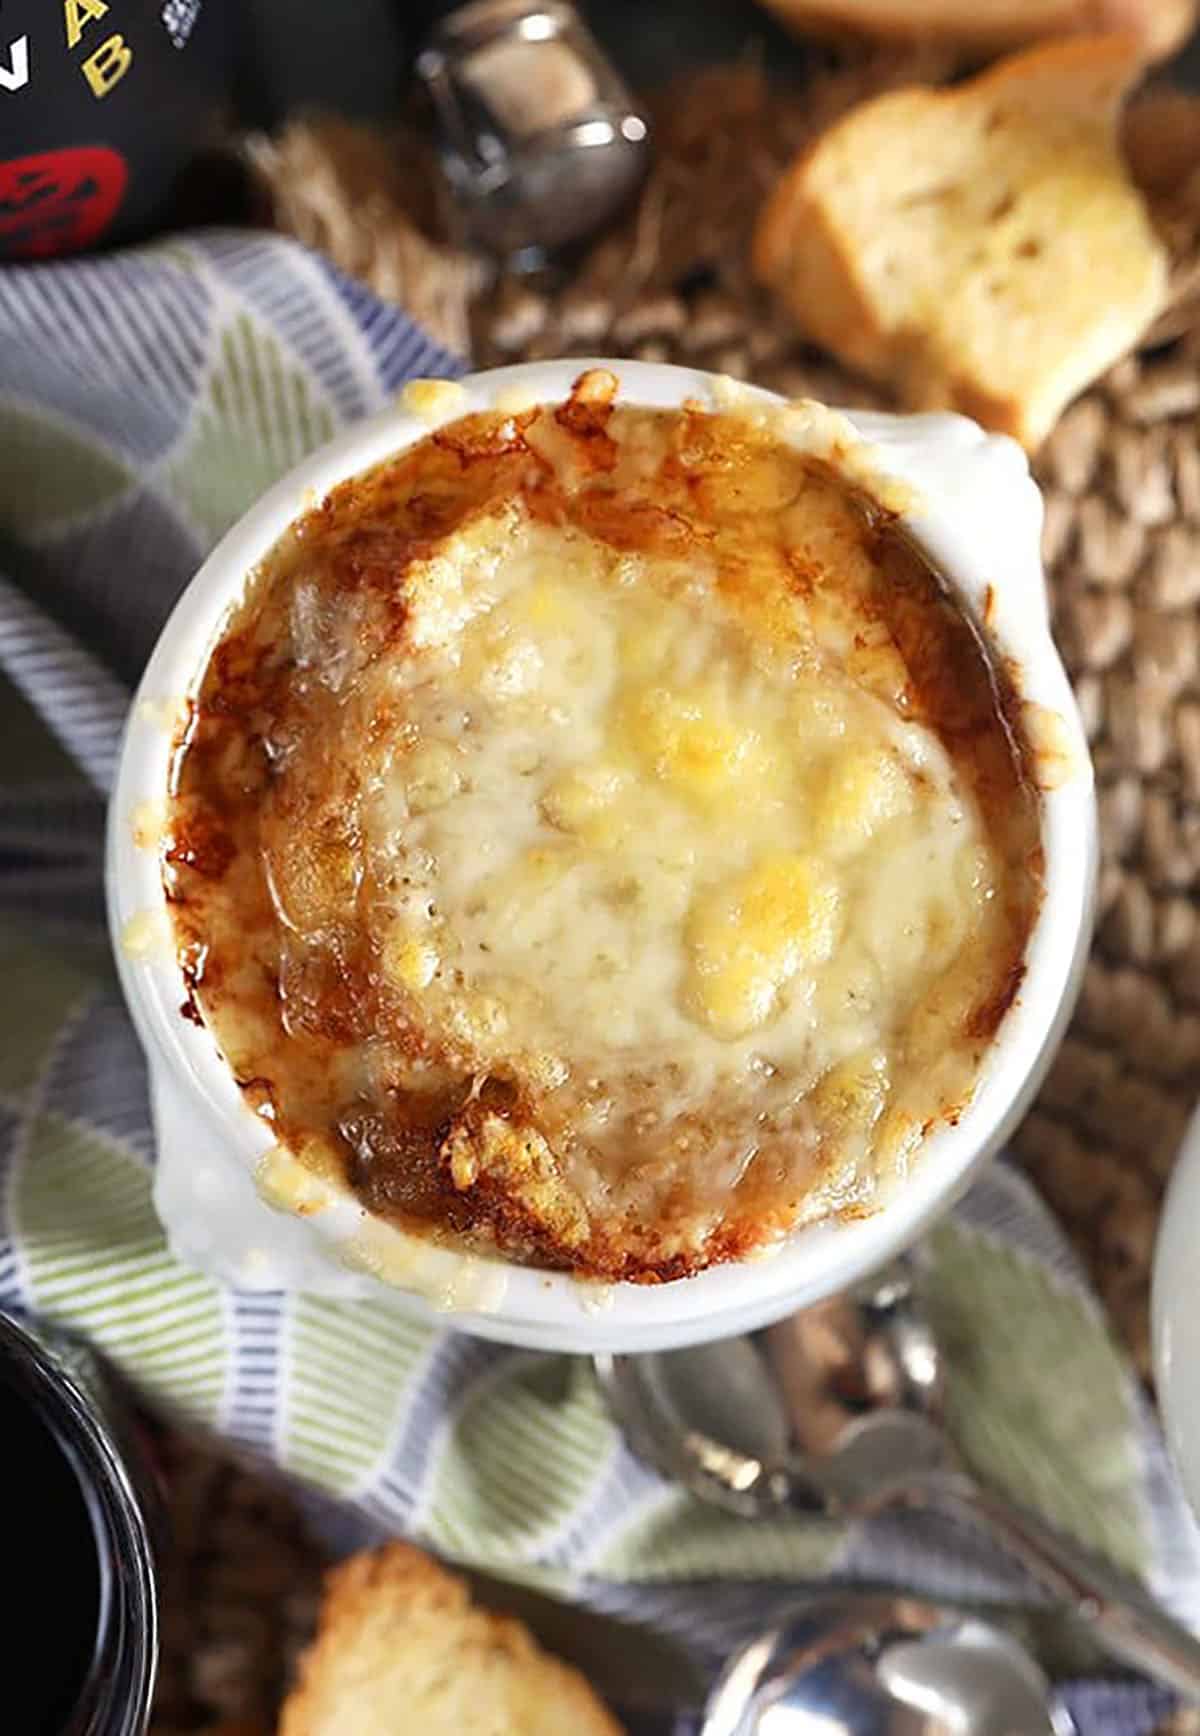 Melted, golden cheese on top of French onion soup in a white crock.